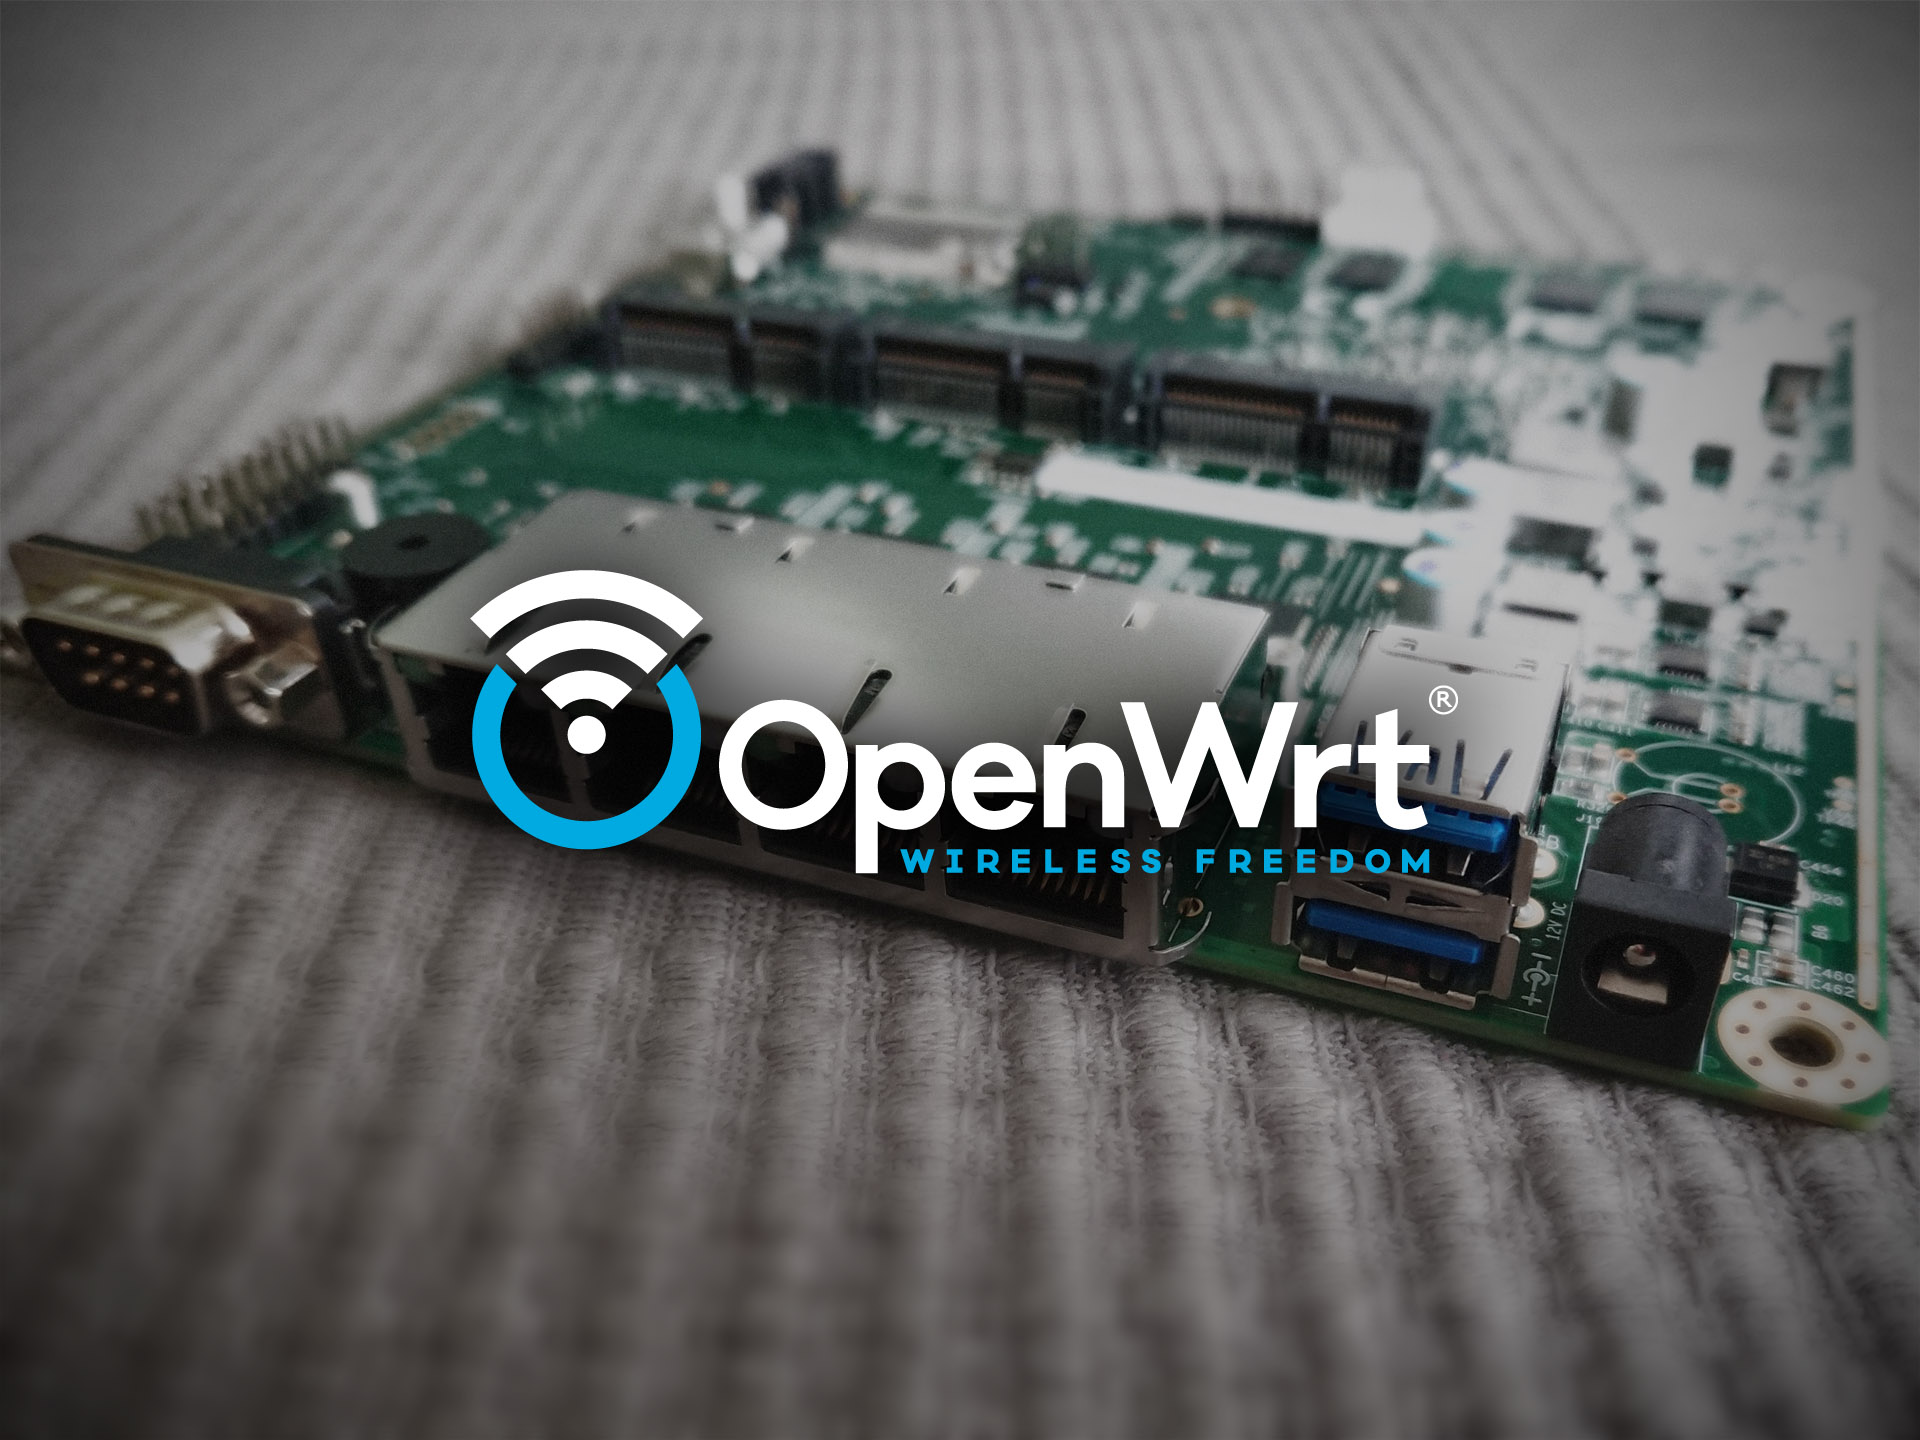 How to update OpenWRT while retaining existing configuration and all custom packages